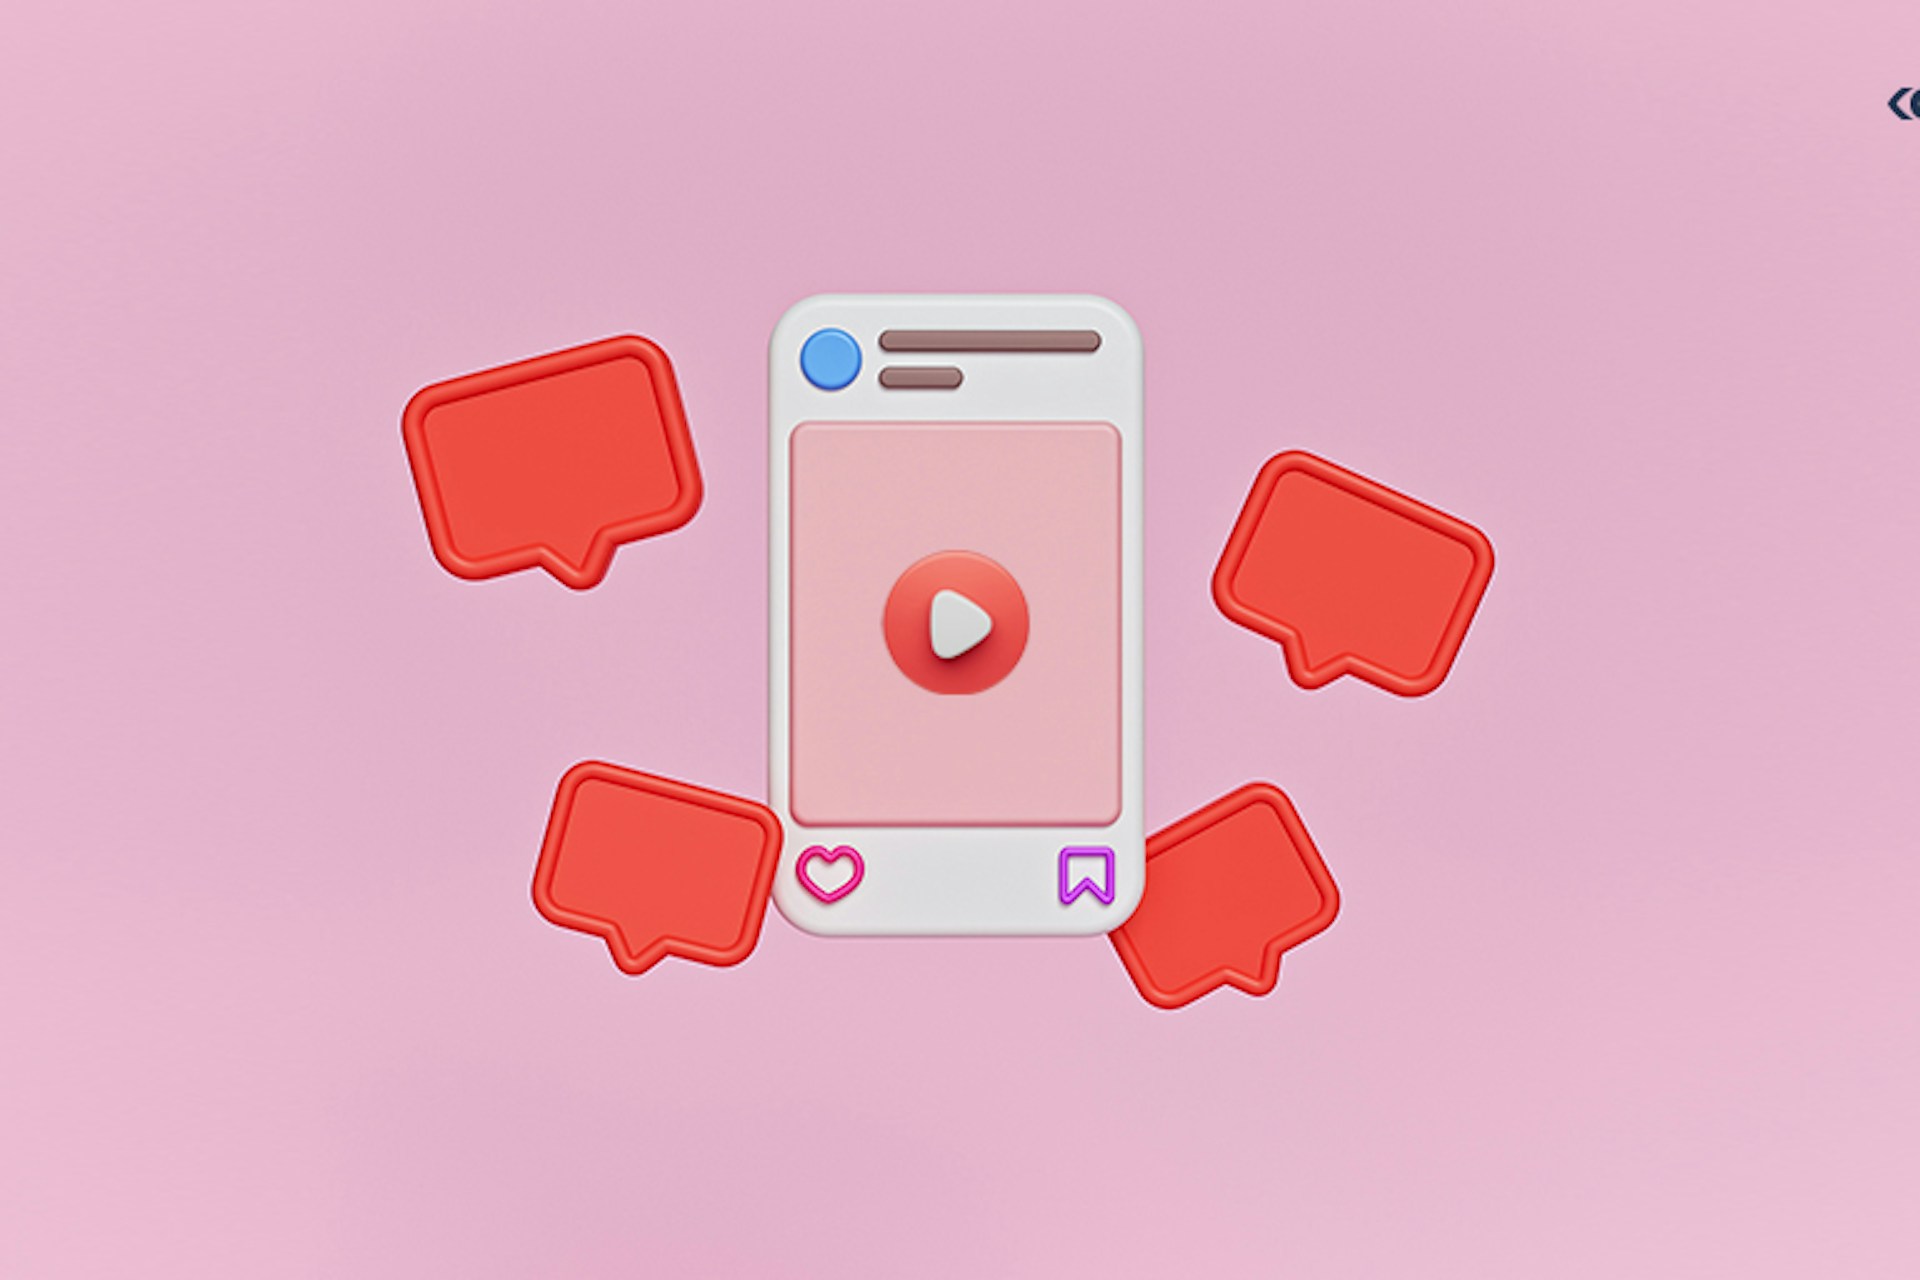 An illustrated image of an IGTV post with a video button in the center and icons of the Instagram heart reaction floating around the post.